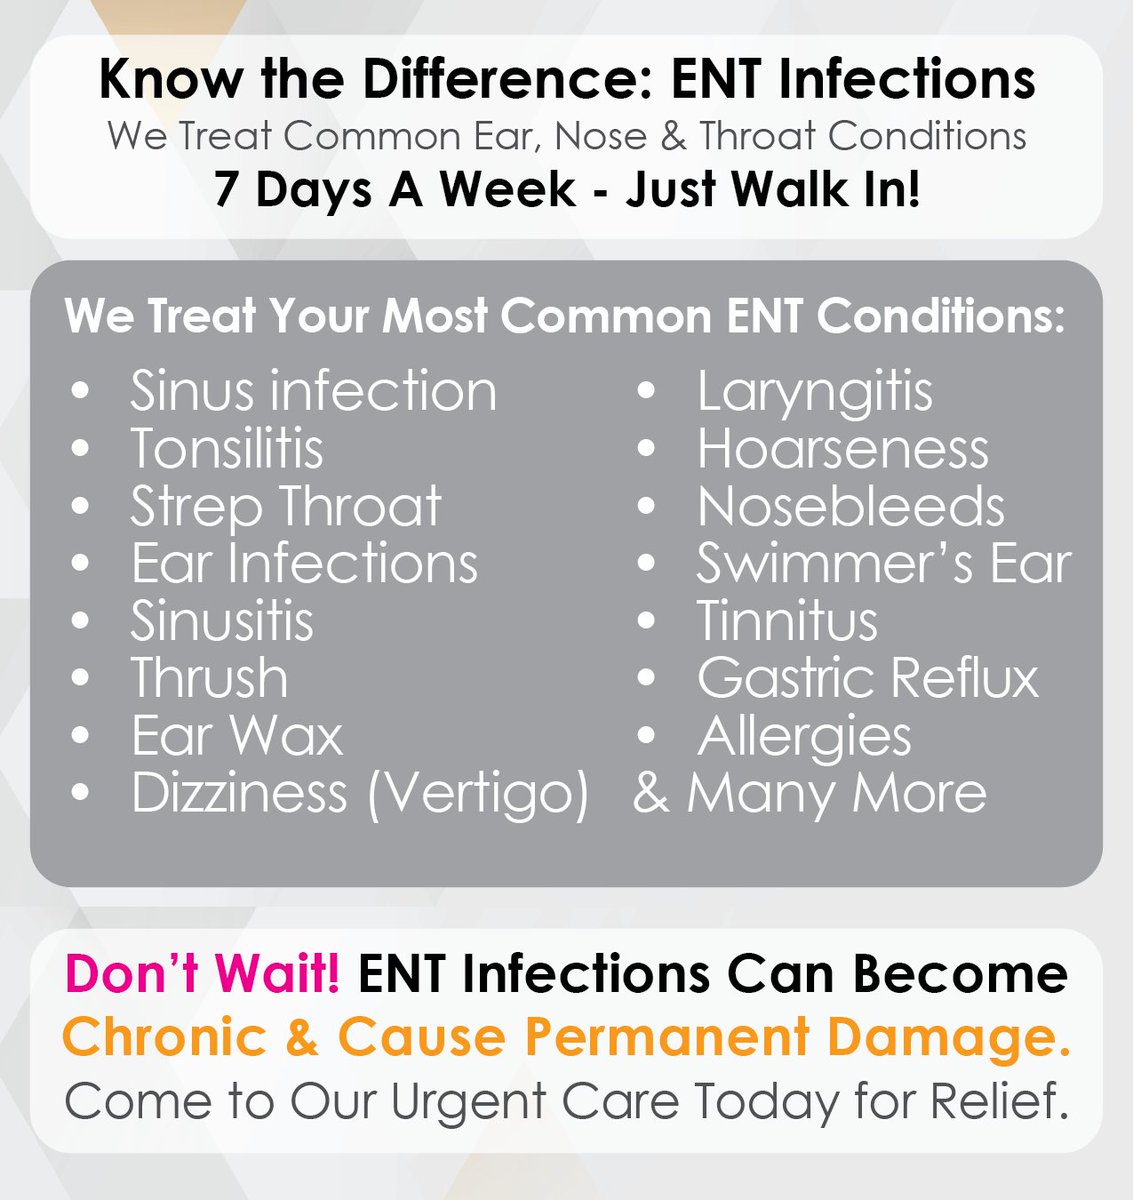 We treat many common illnesses of the ears, nose & throat - 7 Days A Week. Don't wait to get relief, just walk in!

#doctorsofficeurgentcare #NJdoctors #illnesses #ENT #infections #walkinurgentcare #urgentcare #allergies #sickday #brickNJ #manalapan #paramus #westcaldwell